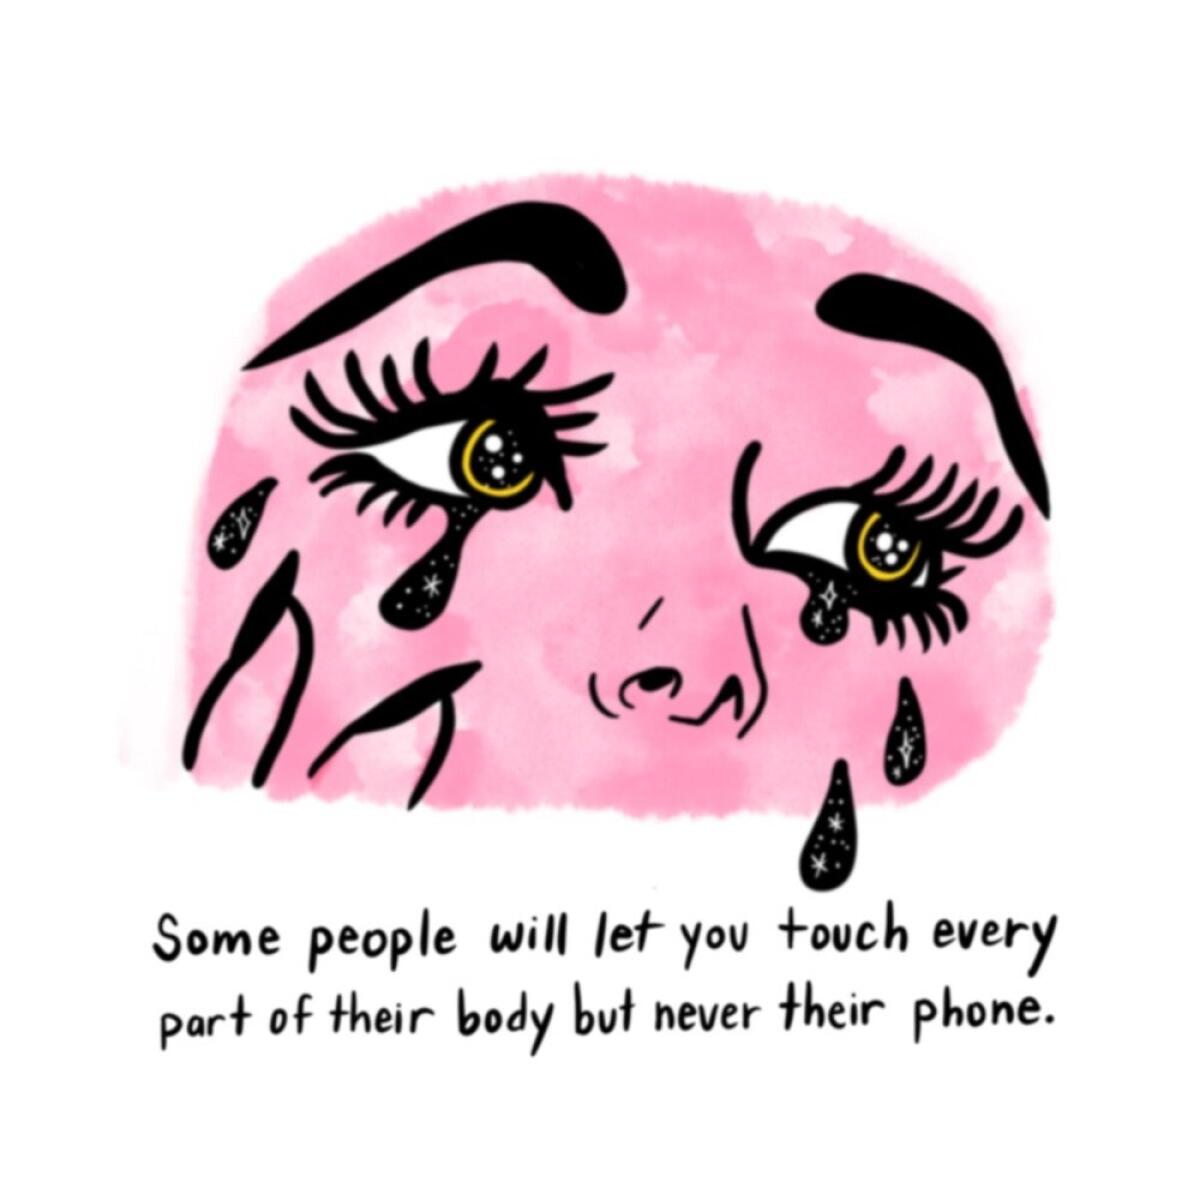 An illustration of a crying woman and words: "Some people will let you touch every part of their body but never their phone"